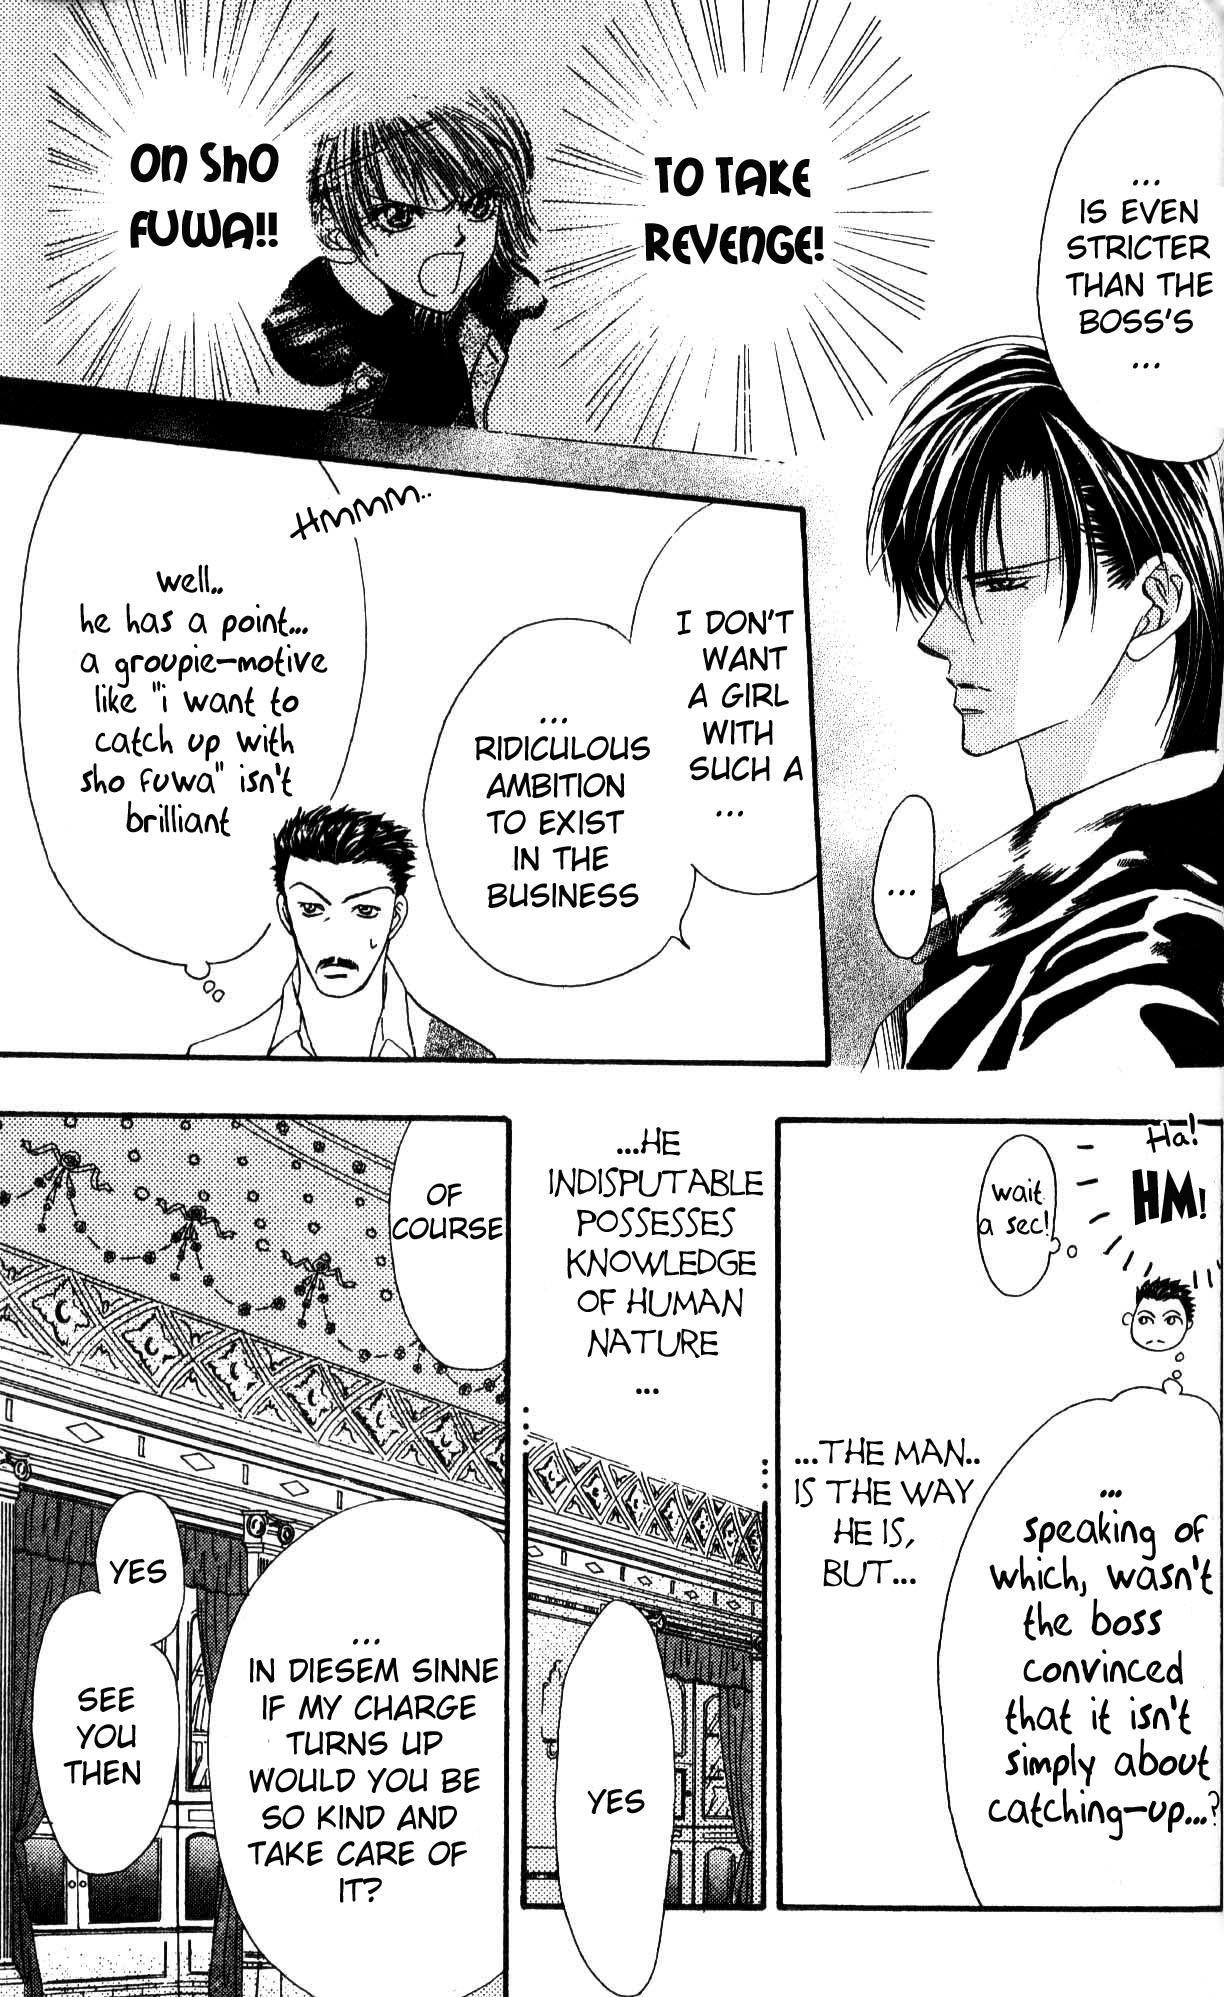 Skip Beat!, Chapter 7 That Name is Taboo image 09